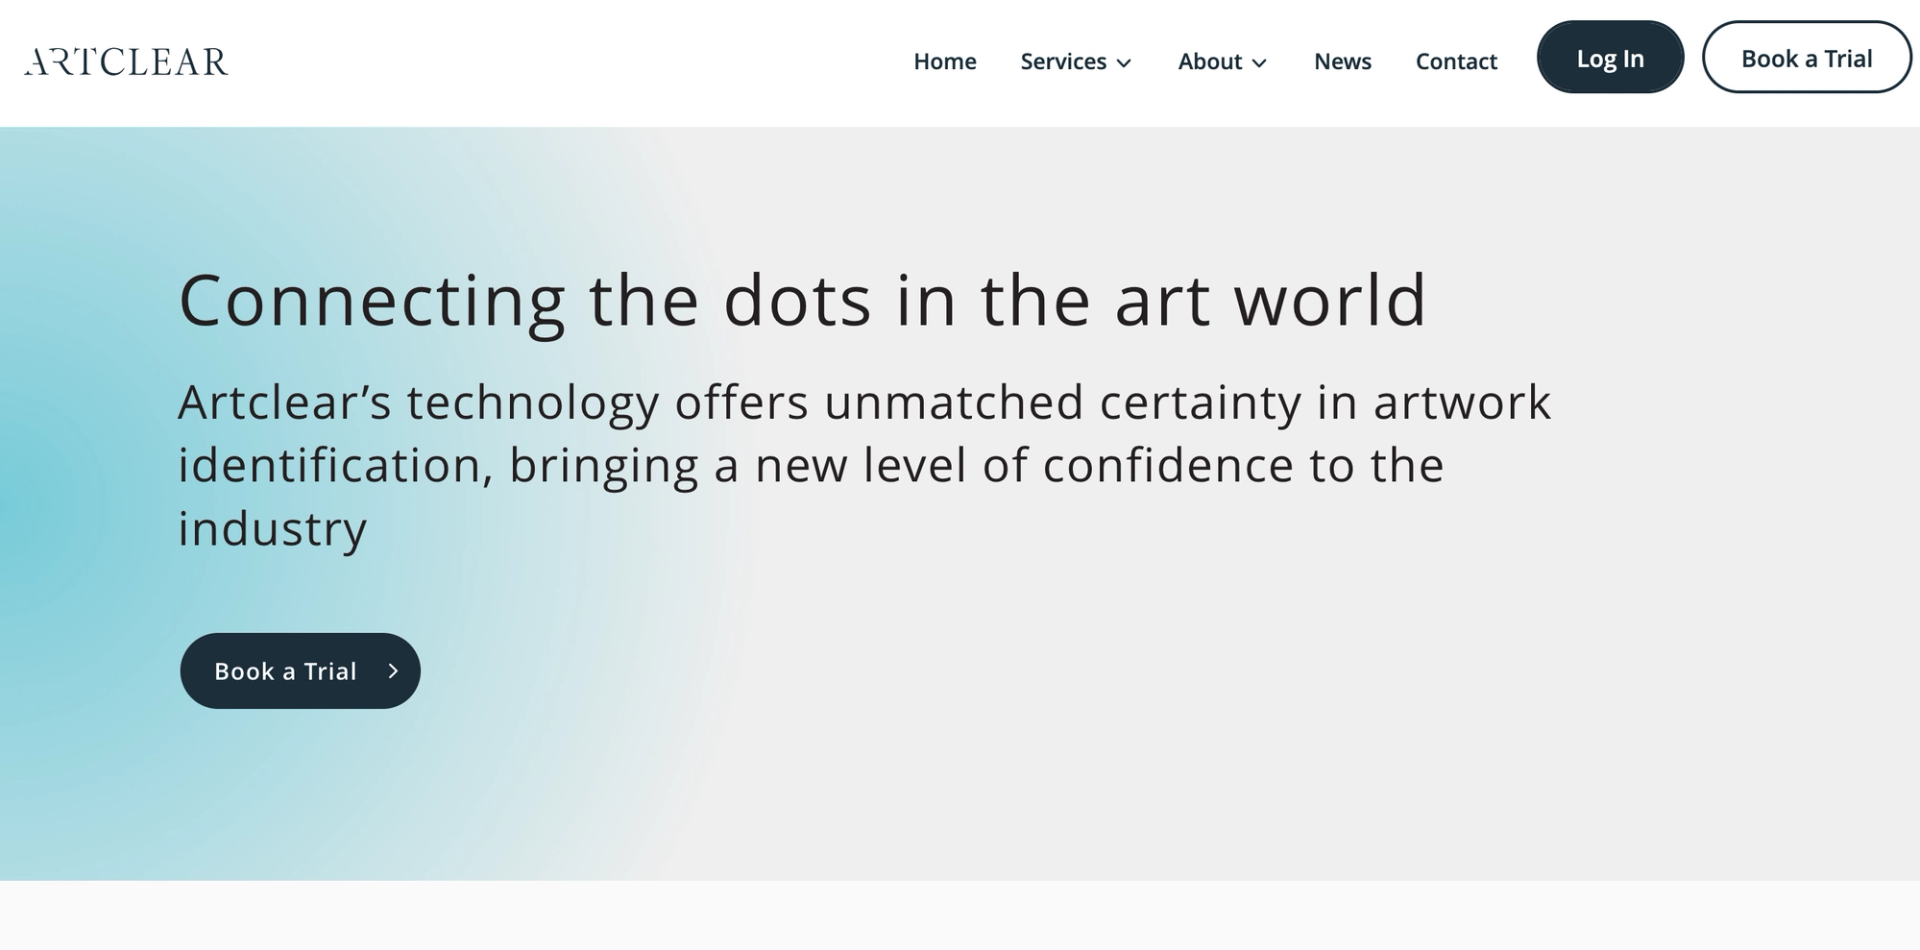 A screenshot of the landing page for the platform Artclear, with the slogan "Connecting the dots in the art world" shown against an ombre blue and white background.